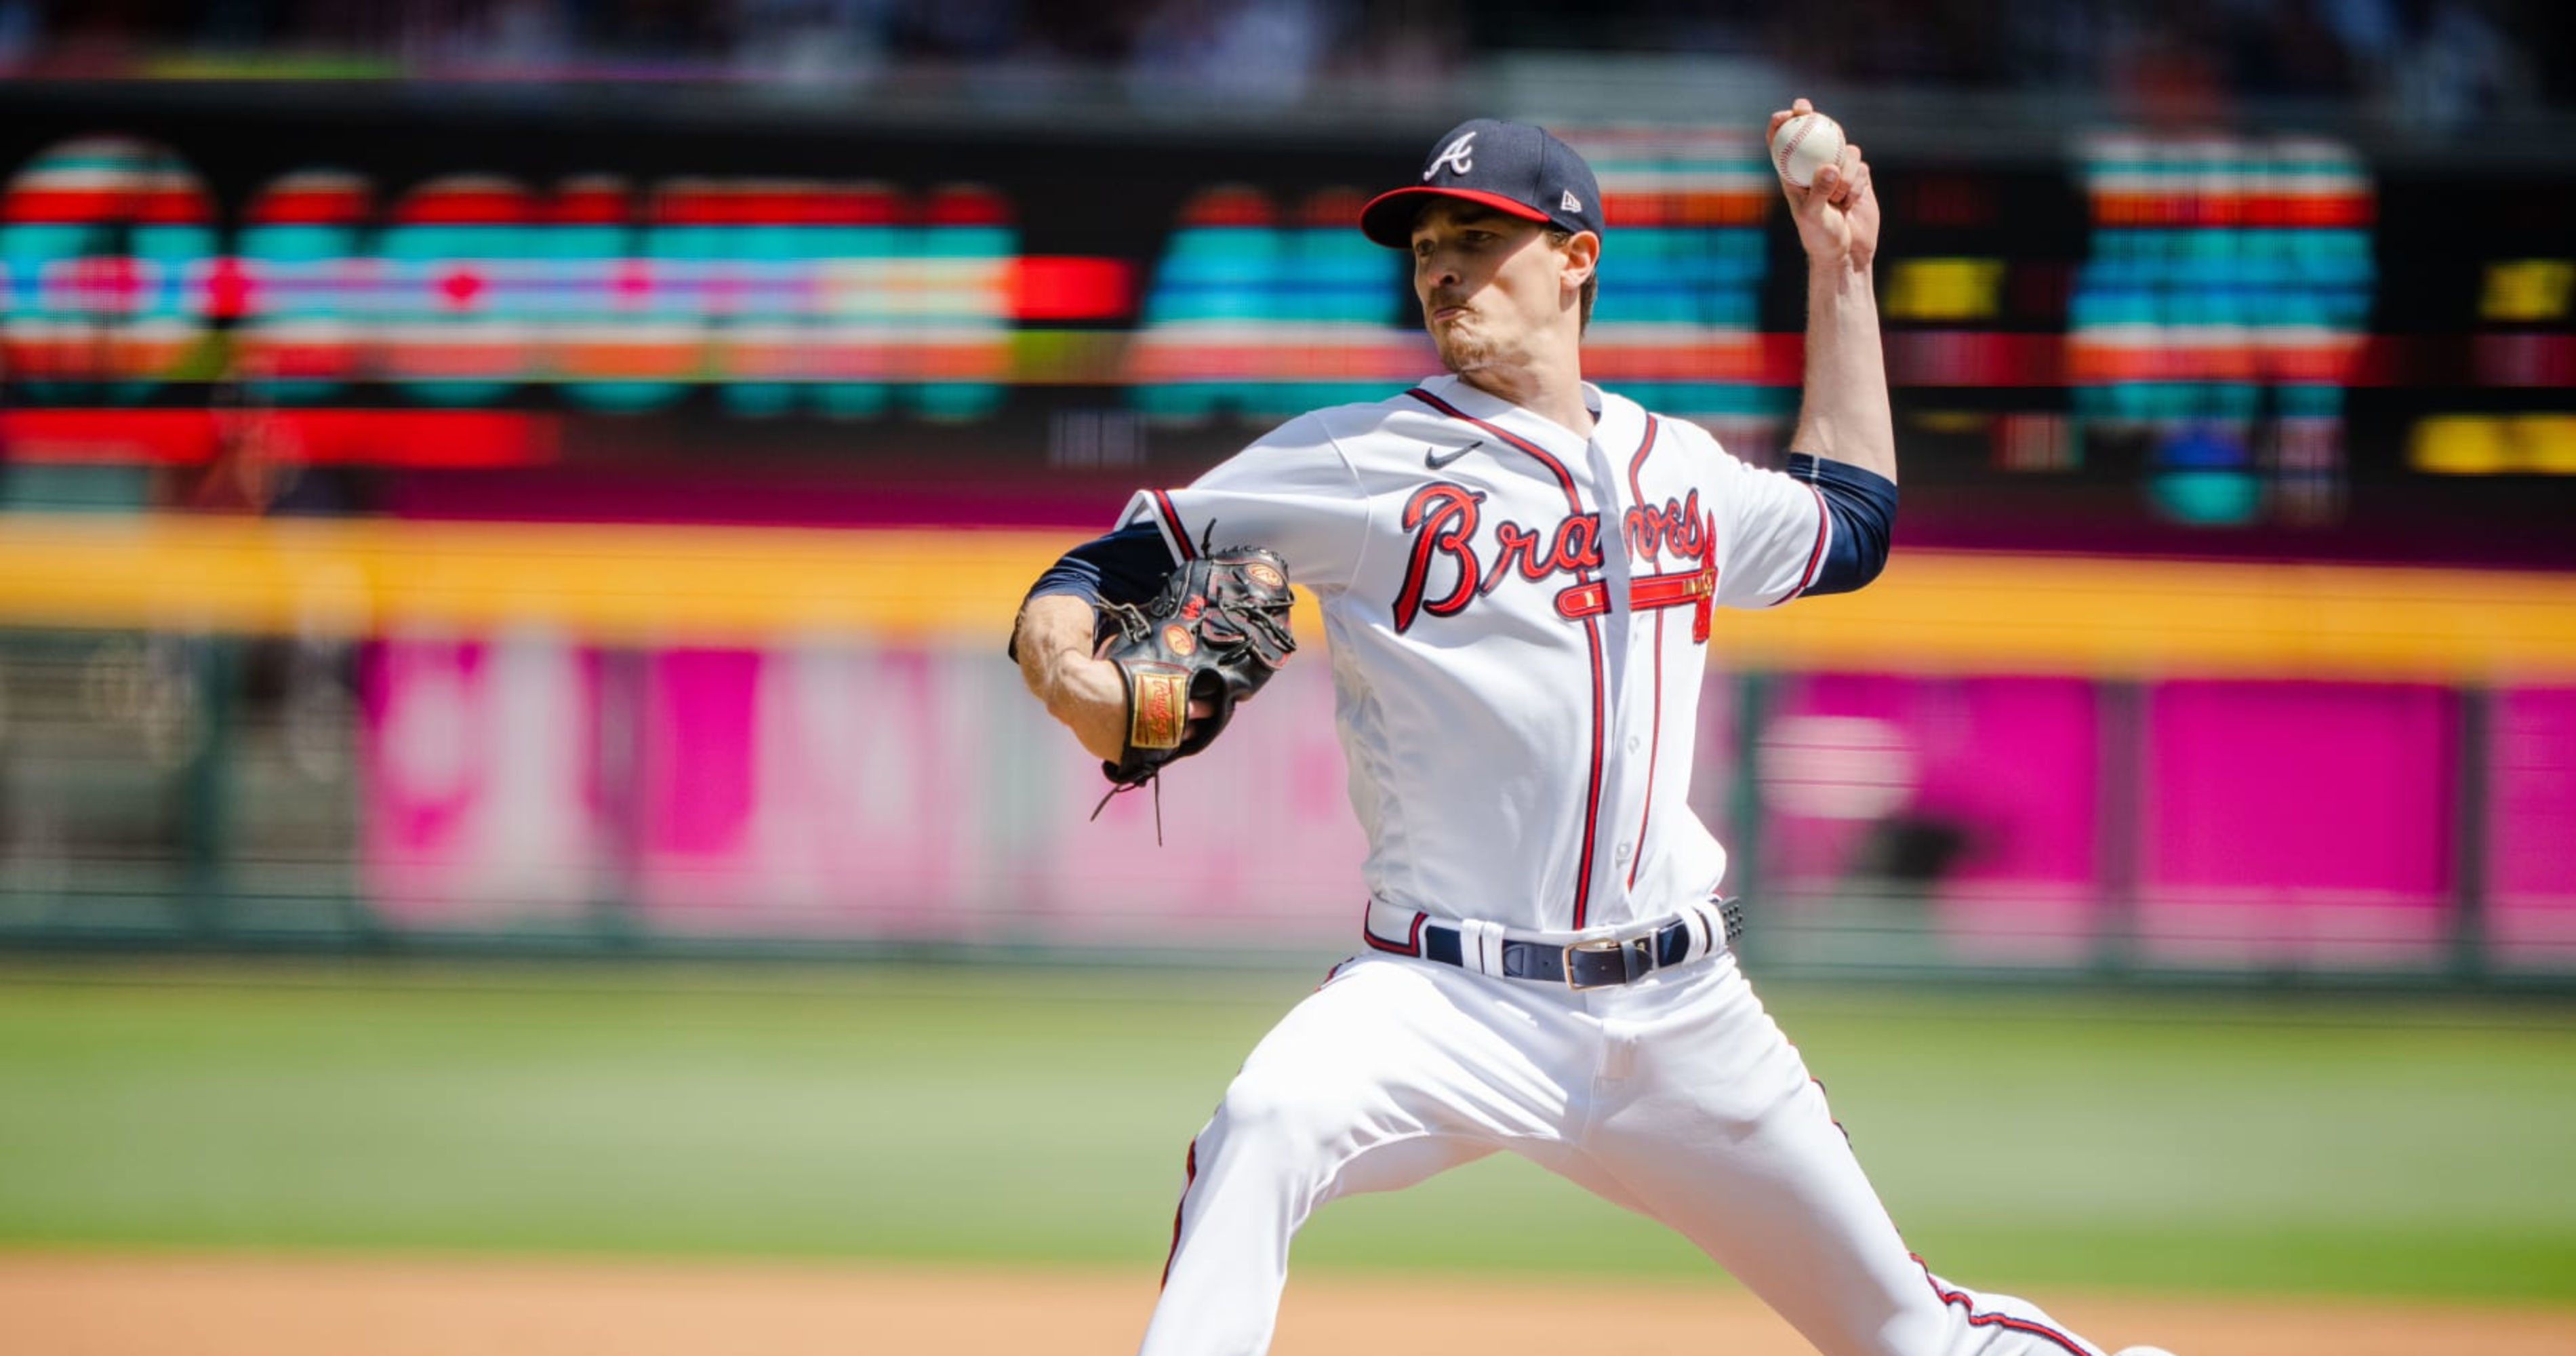 Braves' Max Fried Placed on 15-Day IL with Forearm Injury